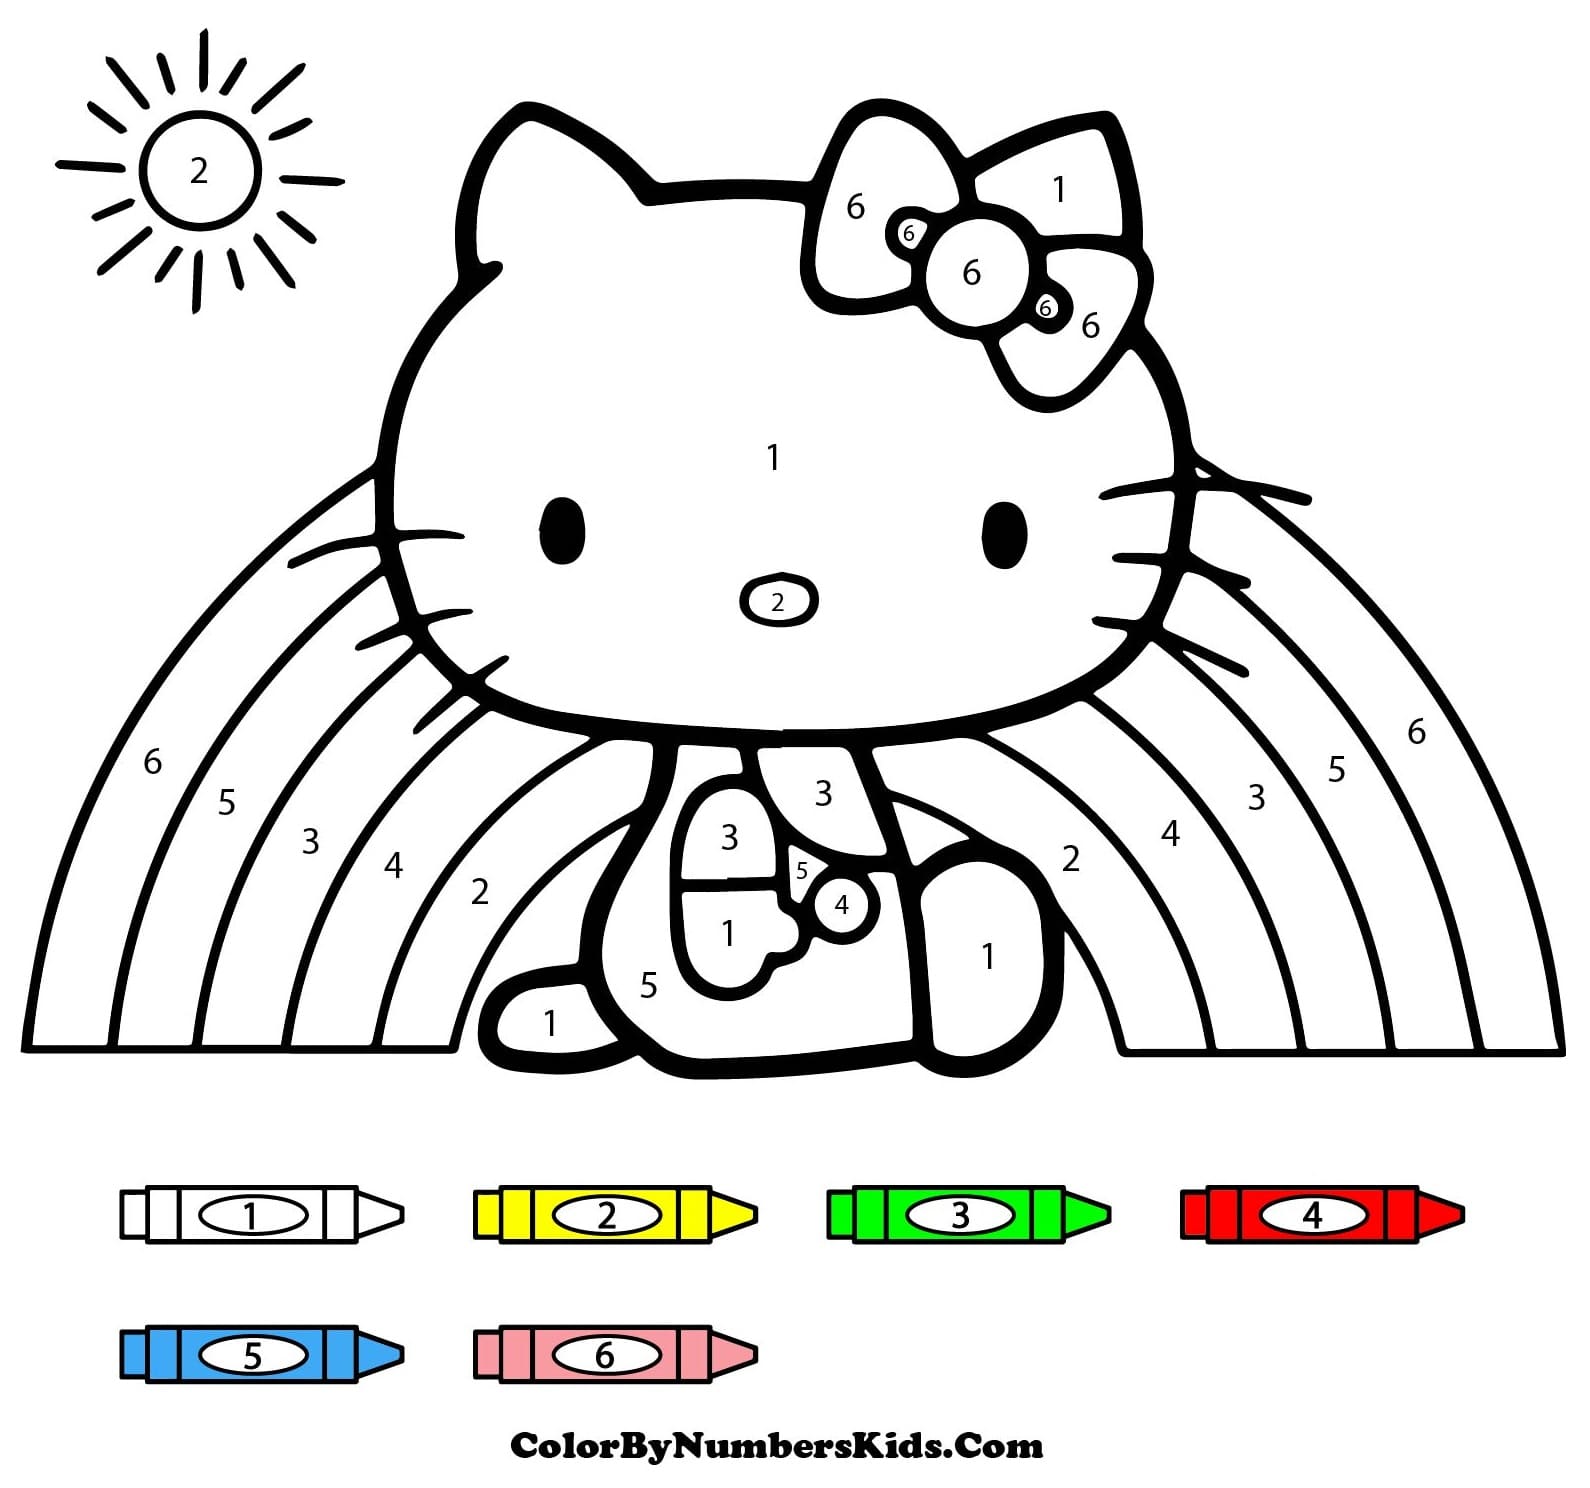 Hello Kitty and Rainbow Color By Number